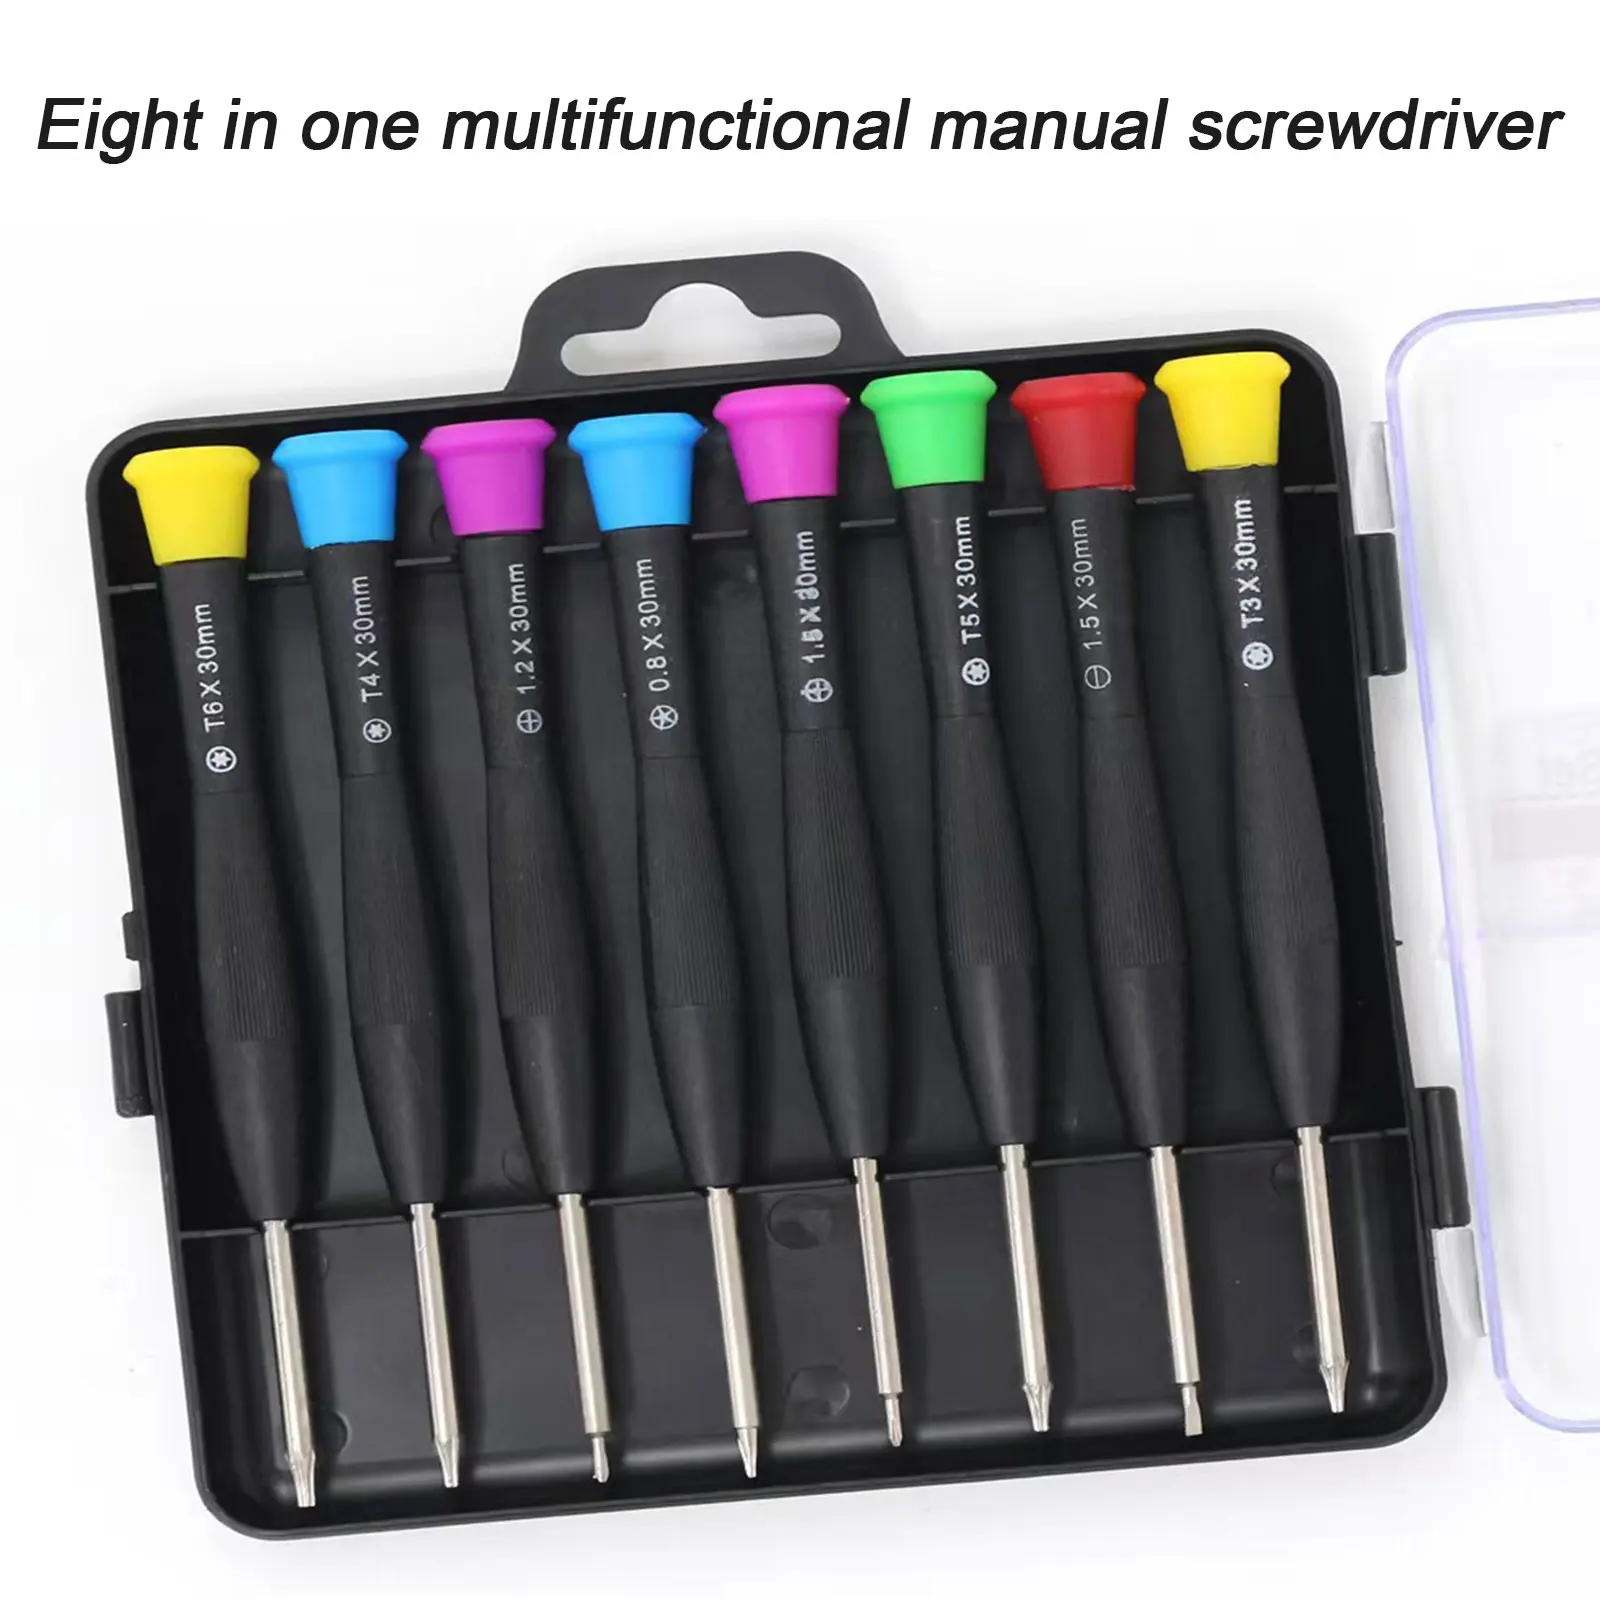 

8 in 1 Screwdriver Set Precision DIY Hand Tools For Mobile Phones Watches Keyboard Toys Game Consoles Repair Tools